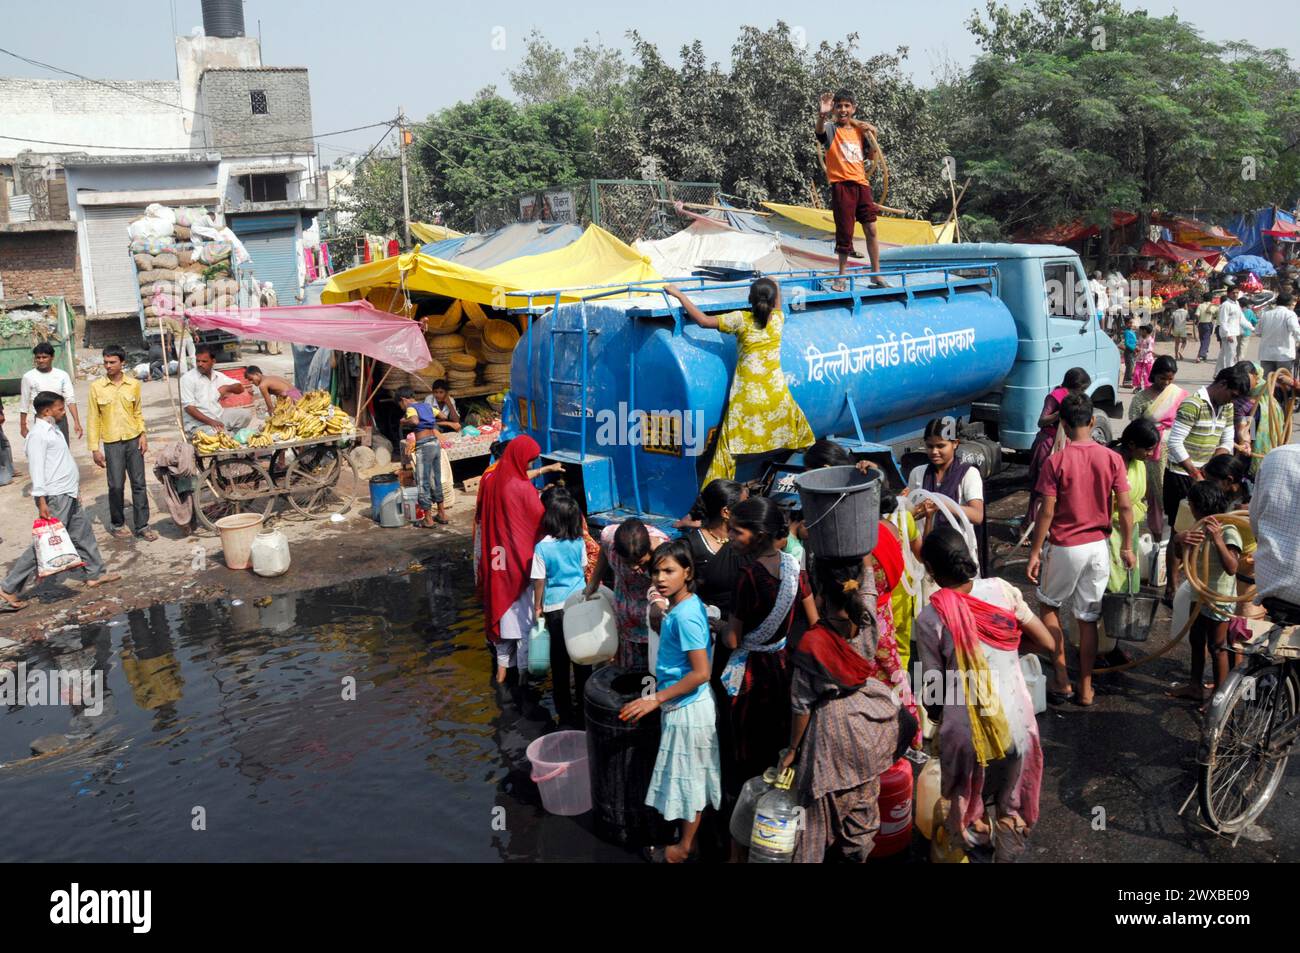 People gather around a water tanker for supply in an urban environment, Rajasthan, North India, India Stock Photo